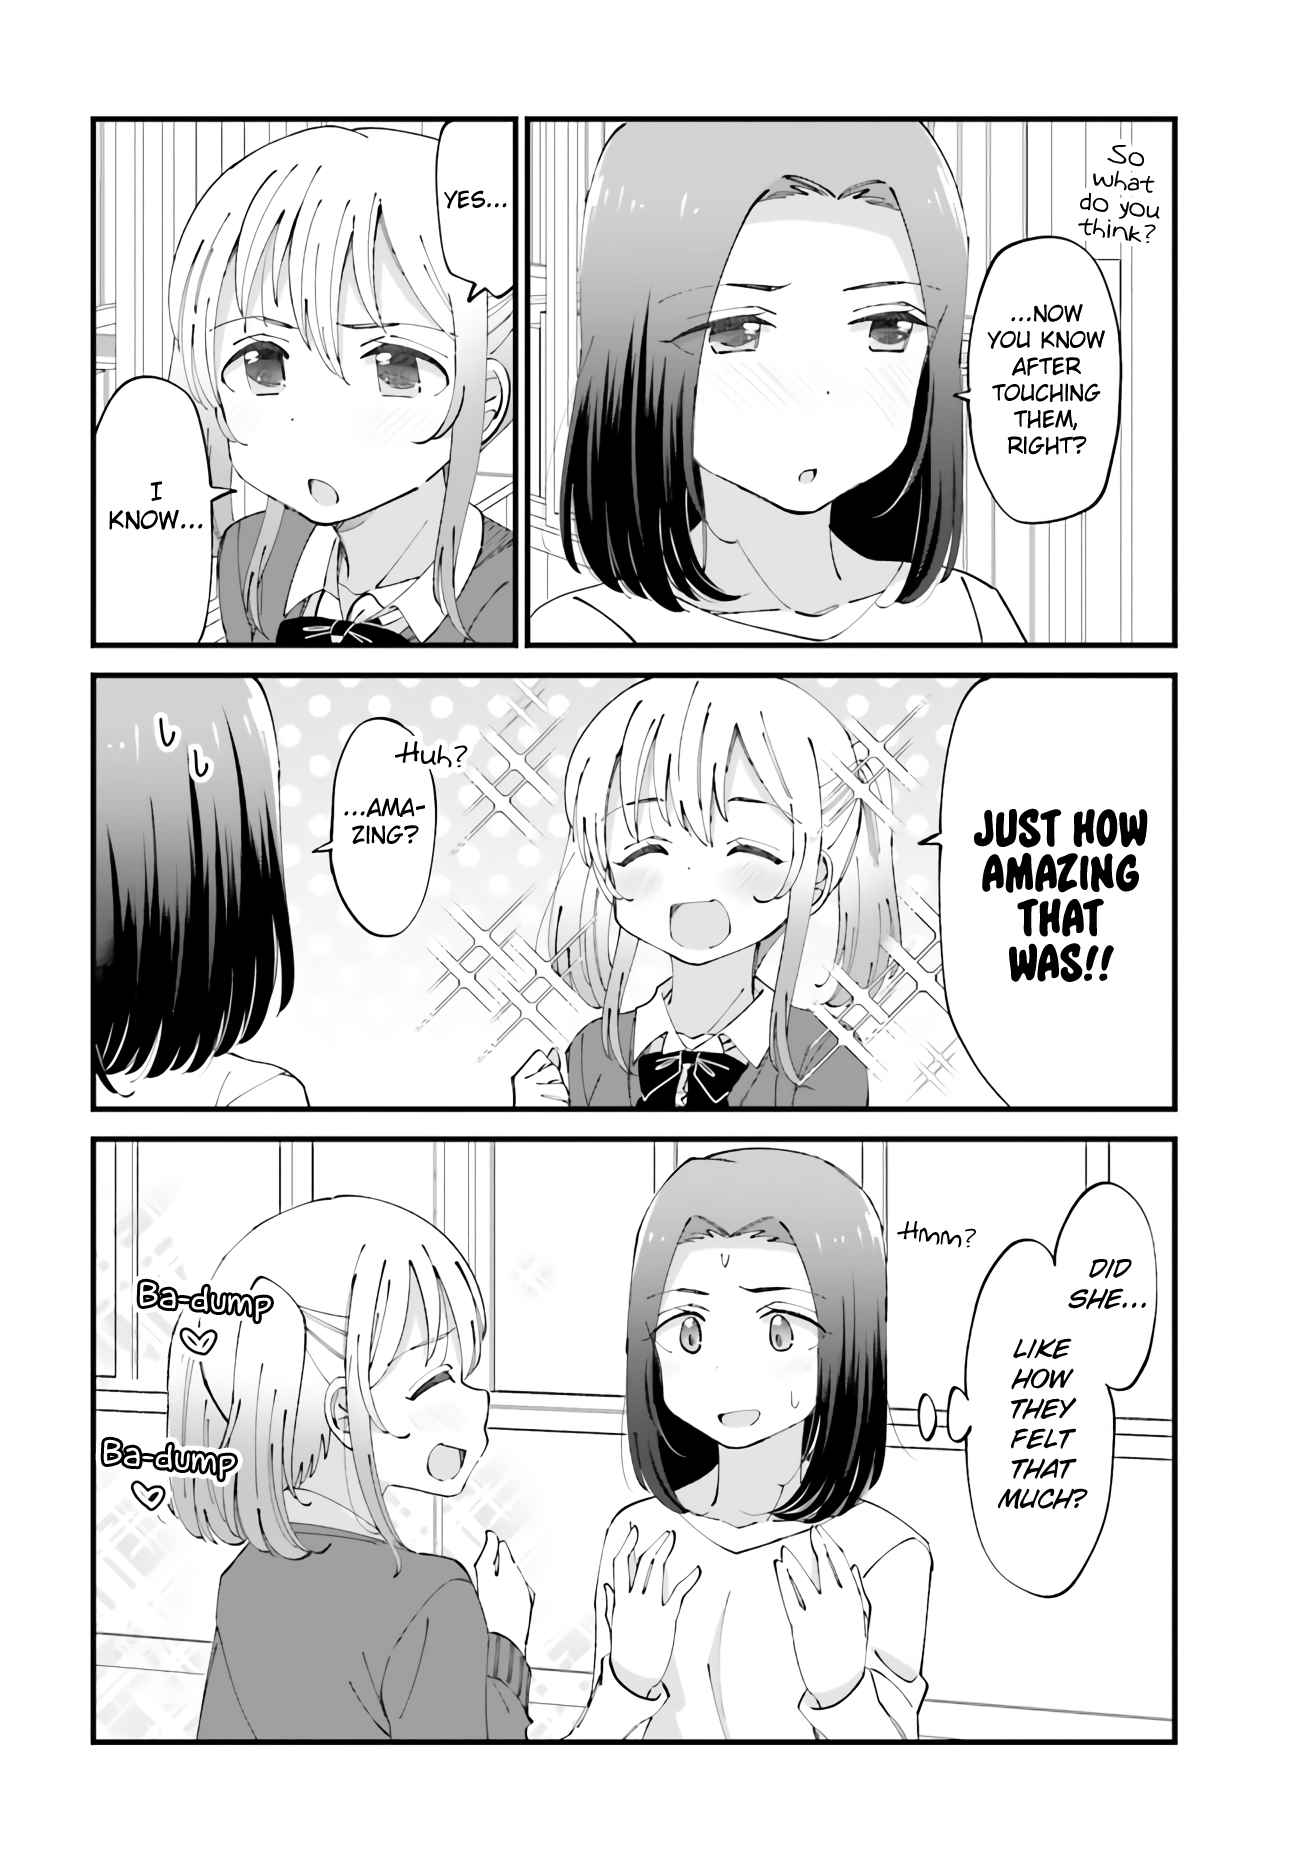 Yuri Moyou Ch. 23 The eldest sister Ryou's love 7